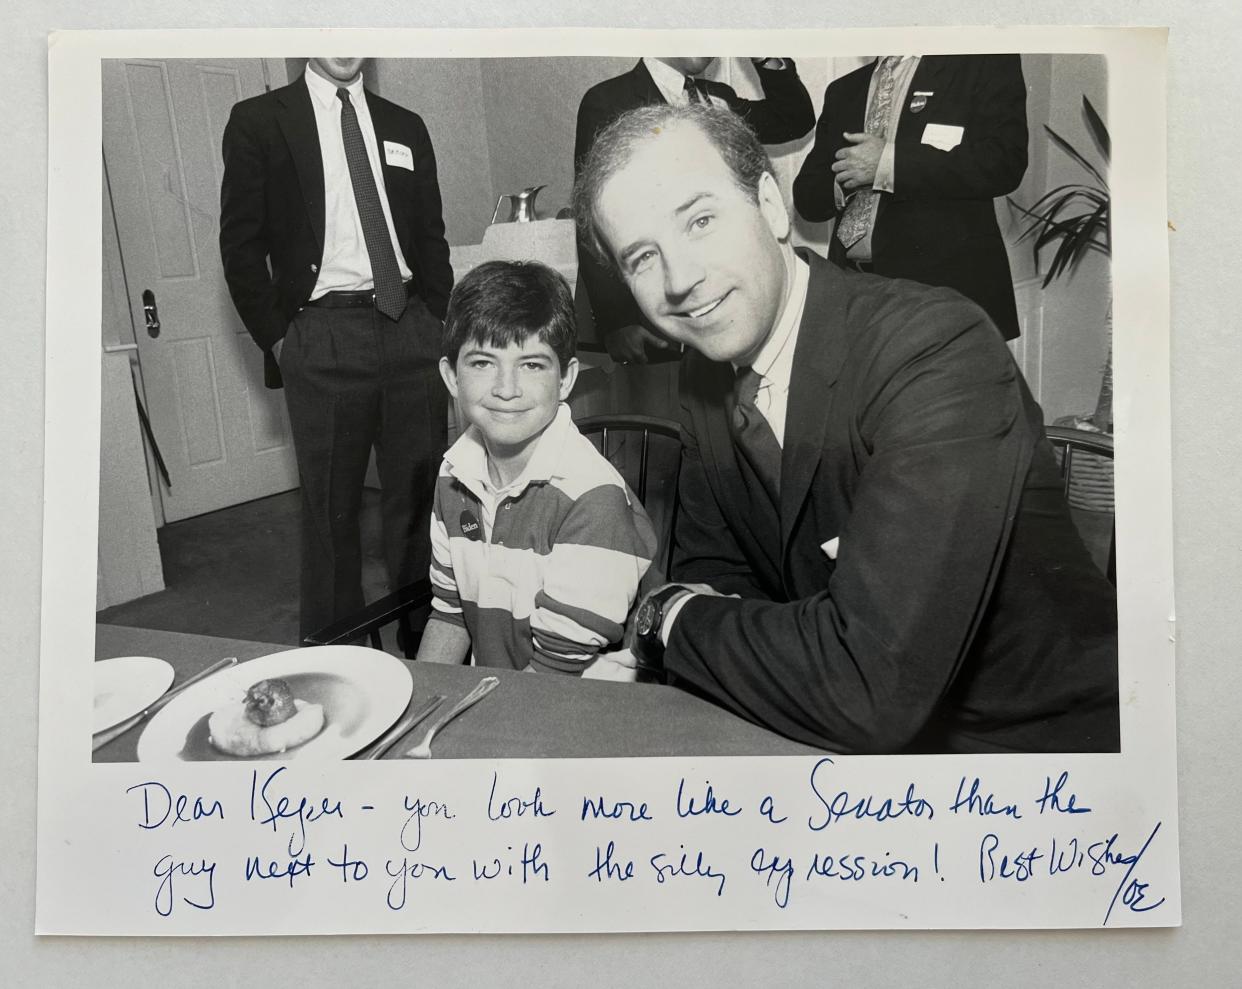 Democrat Joe Biden, who first ran for president in 1988, was a senator when he signed this photo taken with Keper Connell. The image was captured by Connell's mother, Seacoast freelance photographer Marianne Pernold (1944-2018).